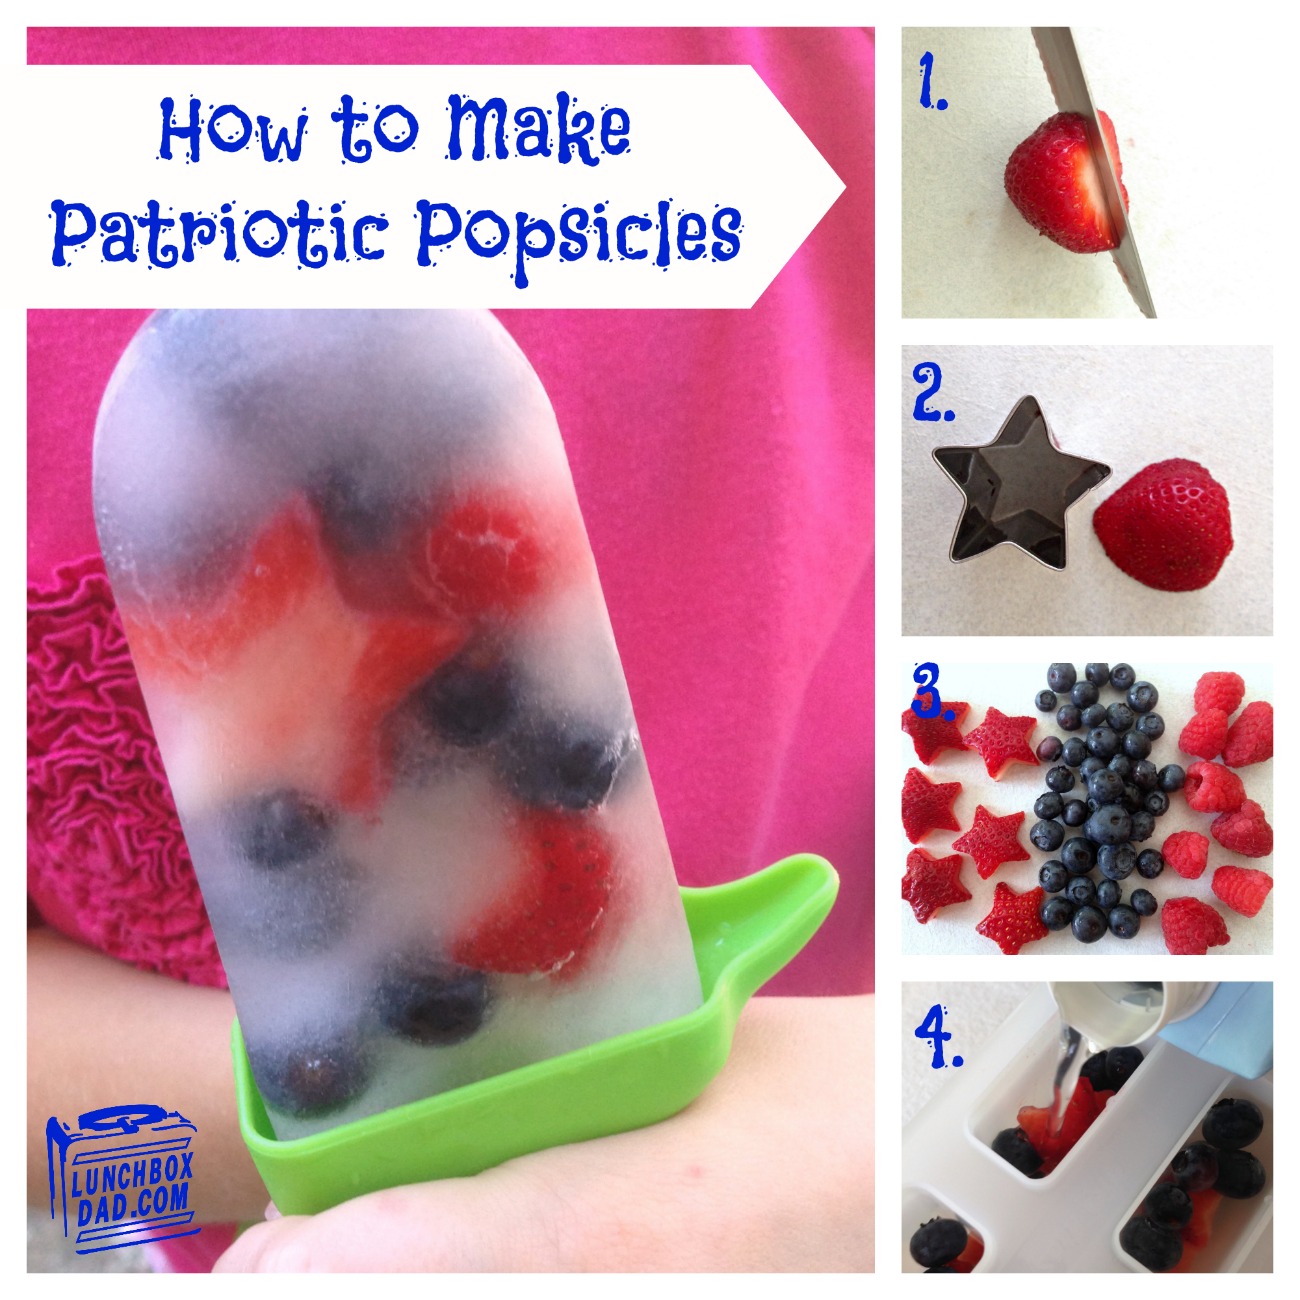 How to make Patriotic Popsicles